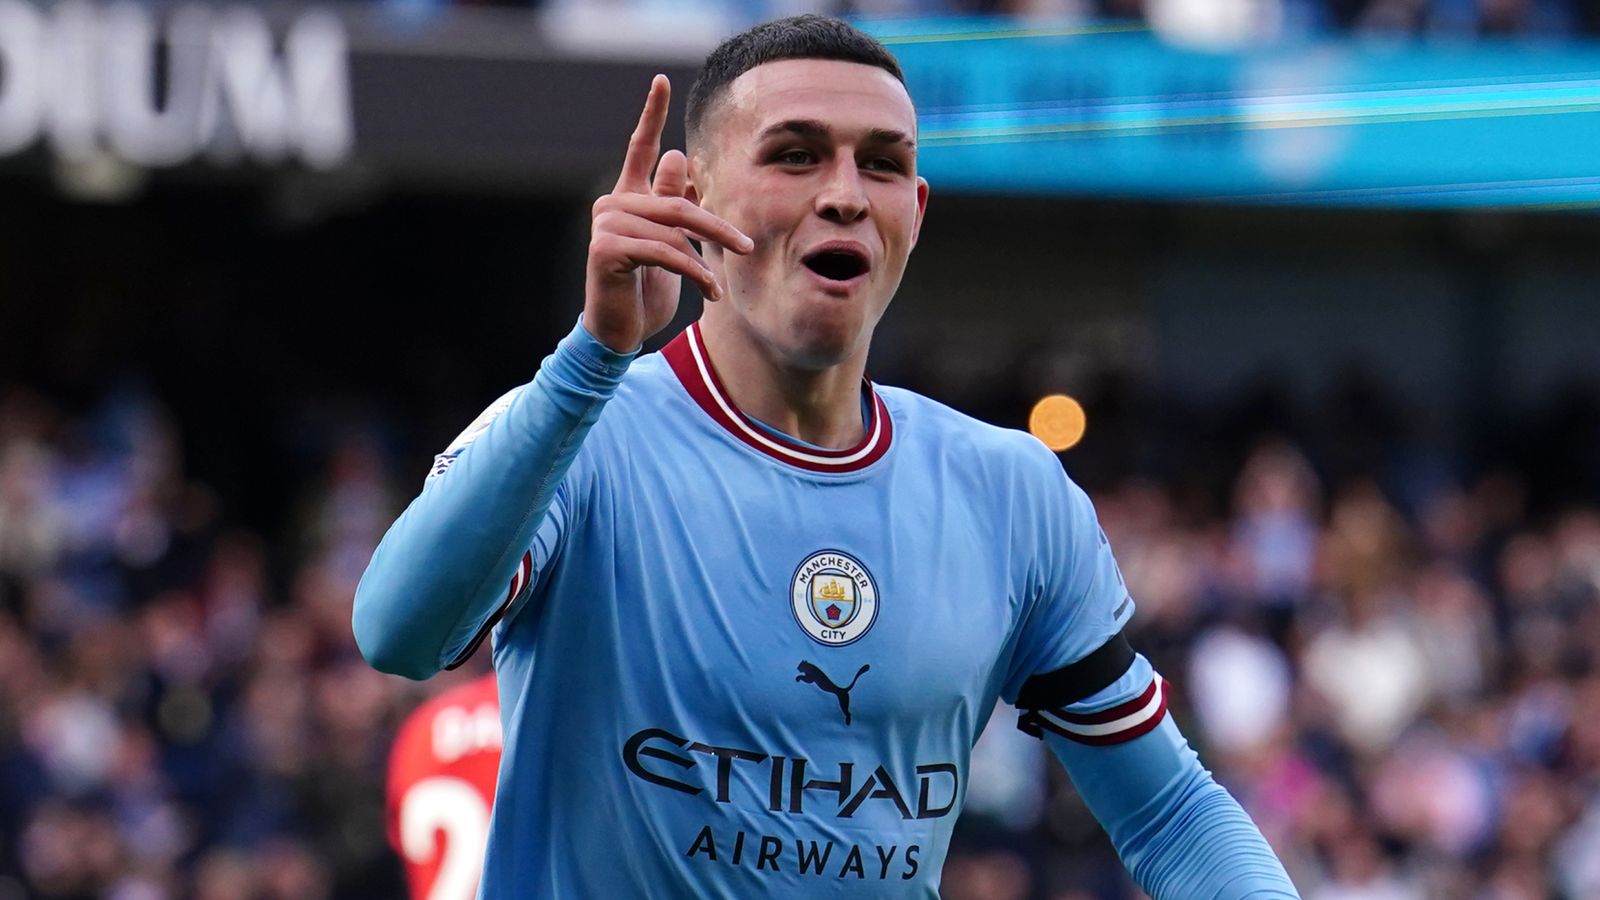 Phil Foden celebrates scoring his second goal, Man City's fourth